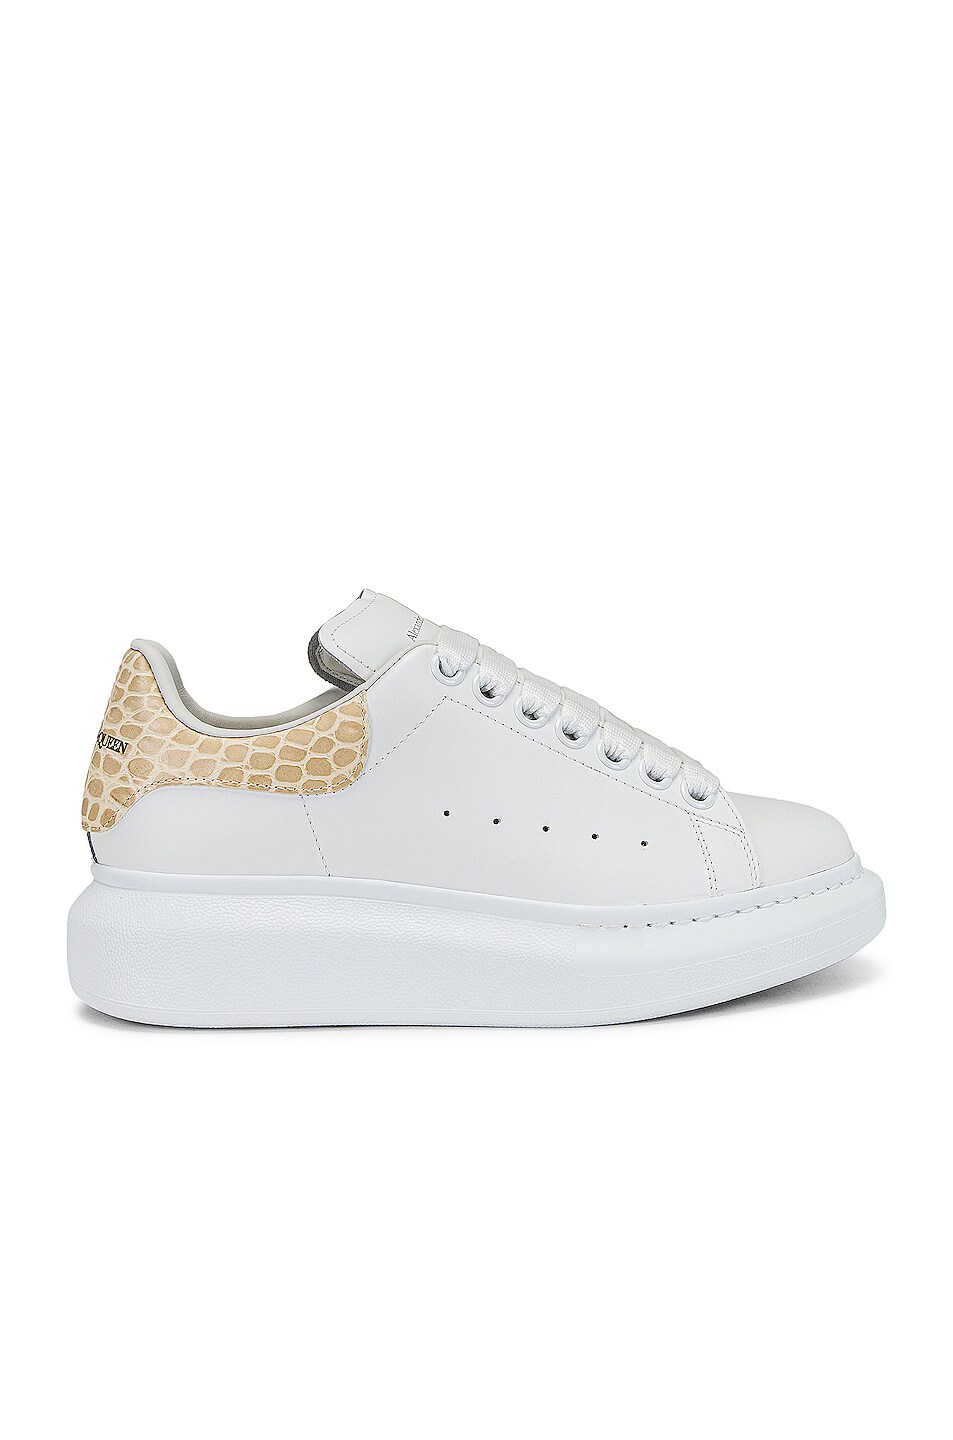 Image 1 of Alexander McQueen Oversized Sneakers in White & Sand